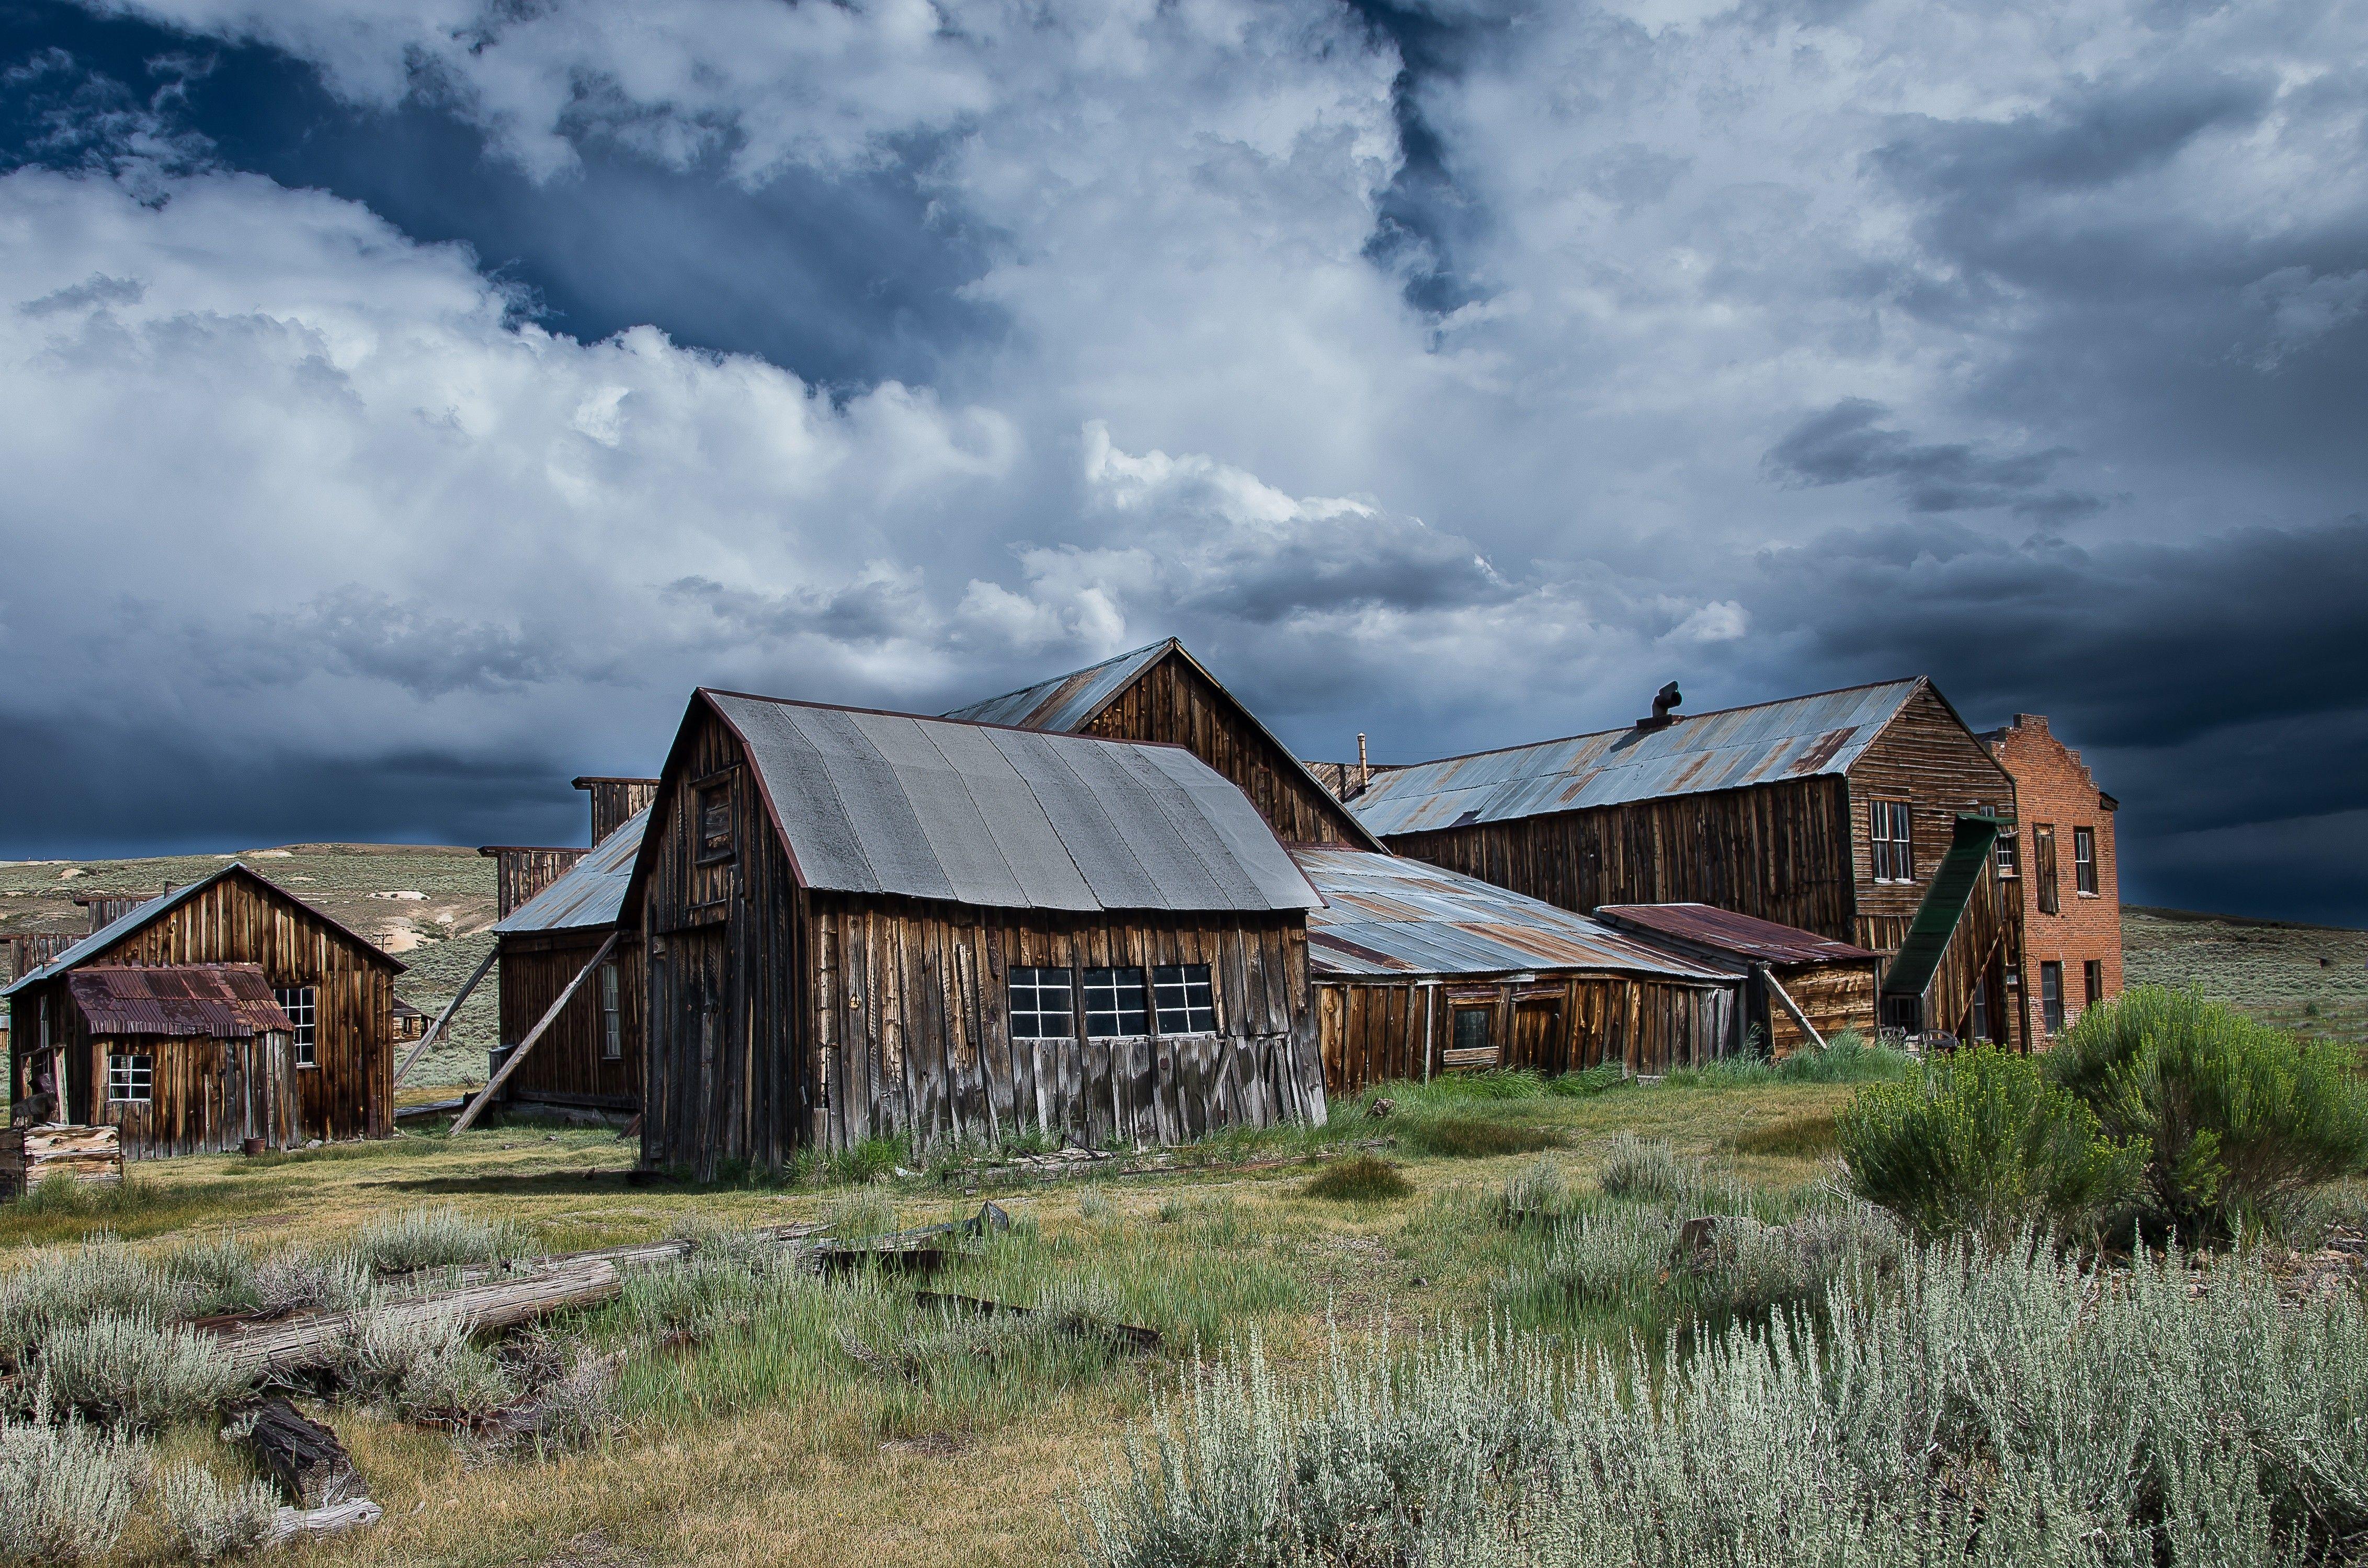 Farms: Bodie Mood Bodies Abandoned Pentax Clouds Sky Old Landscape